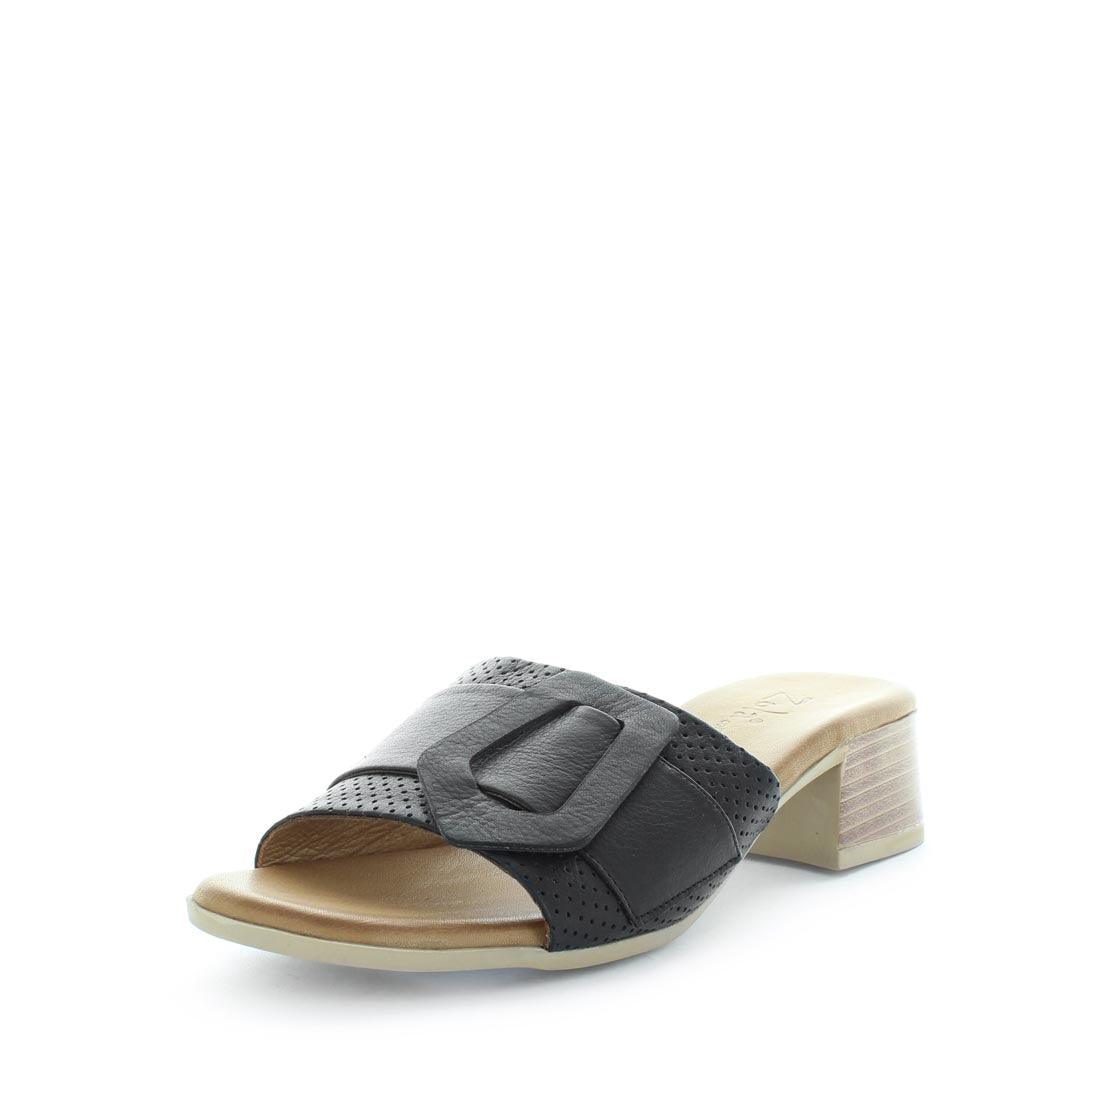 Wide Range of Womens Shoes by Zola Online | iShoes